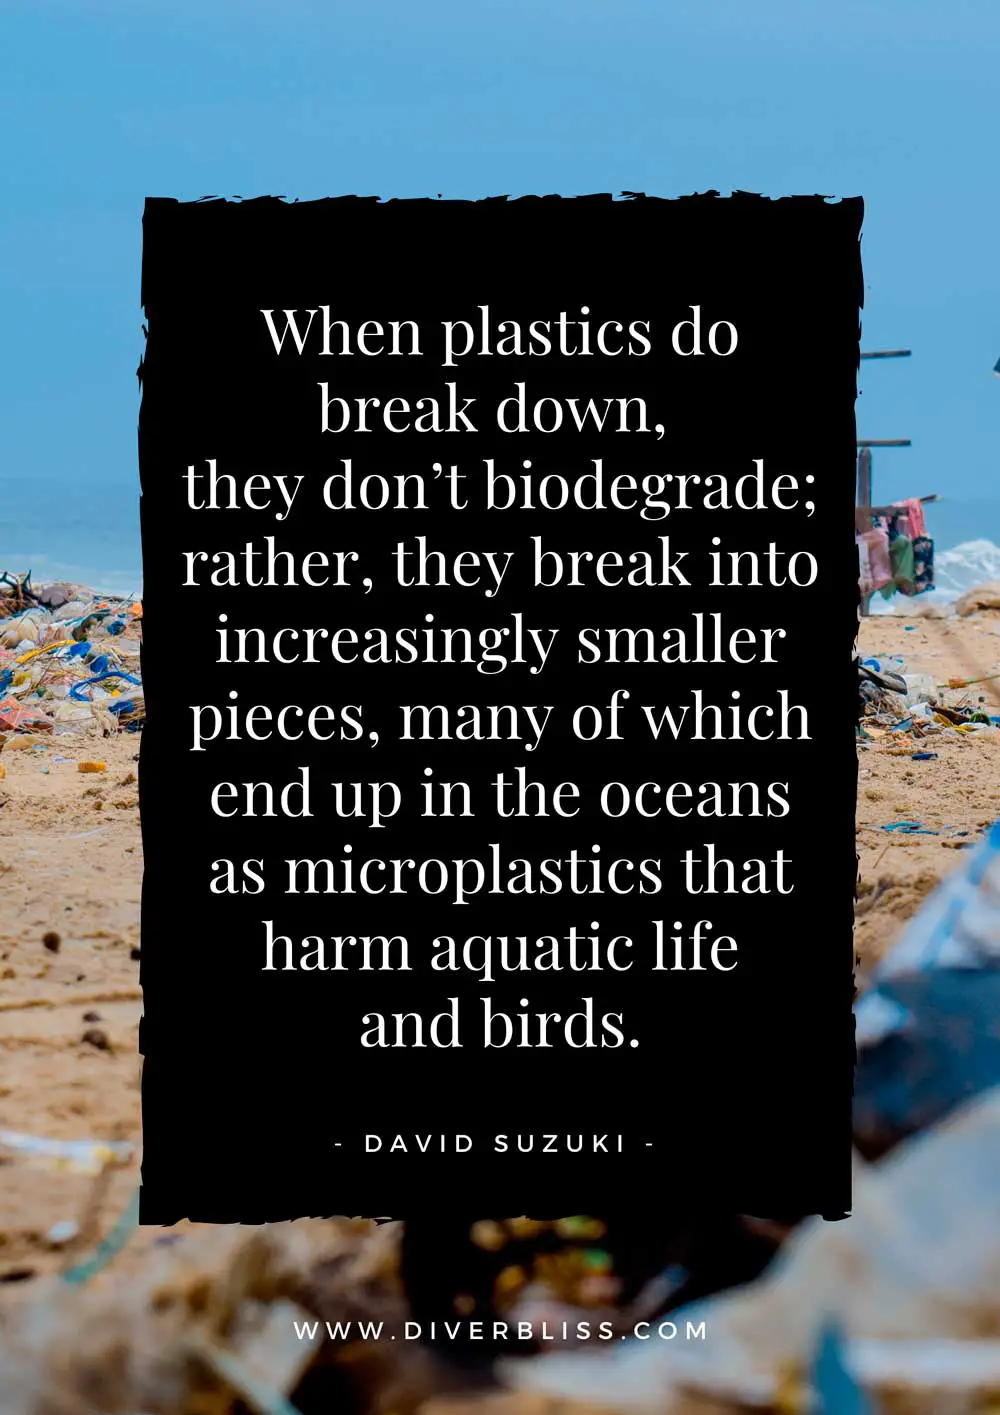 Ocean plastic quotes Poster: 12. "When plastics do break down, they don’t biodegrade; rather, they break into increasingly smaller pieces, many of which end up in the oceans as microplastics that harm aquatic life and birds.”– Dr. David Suzuki